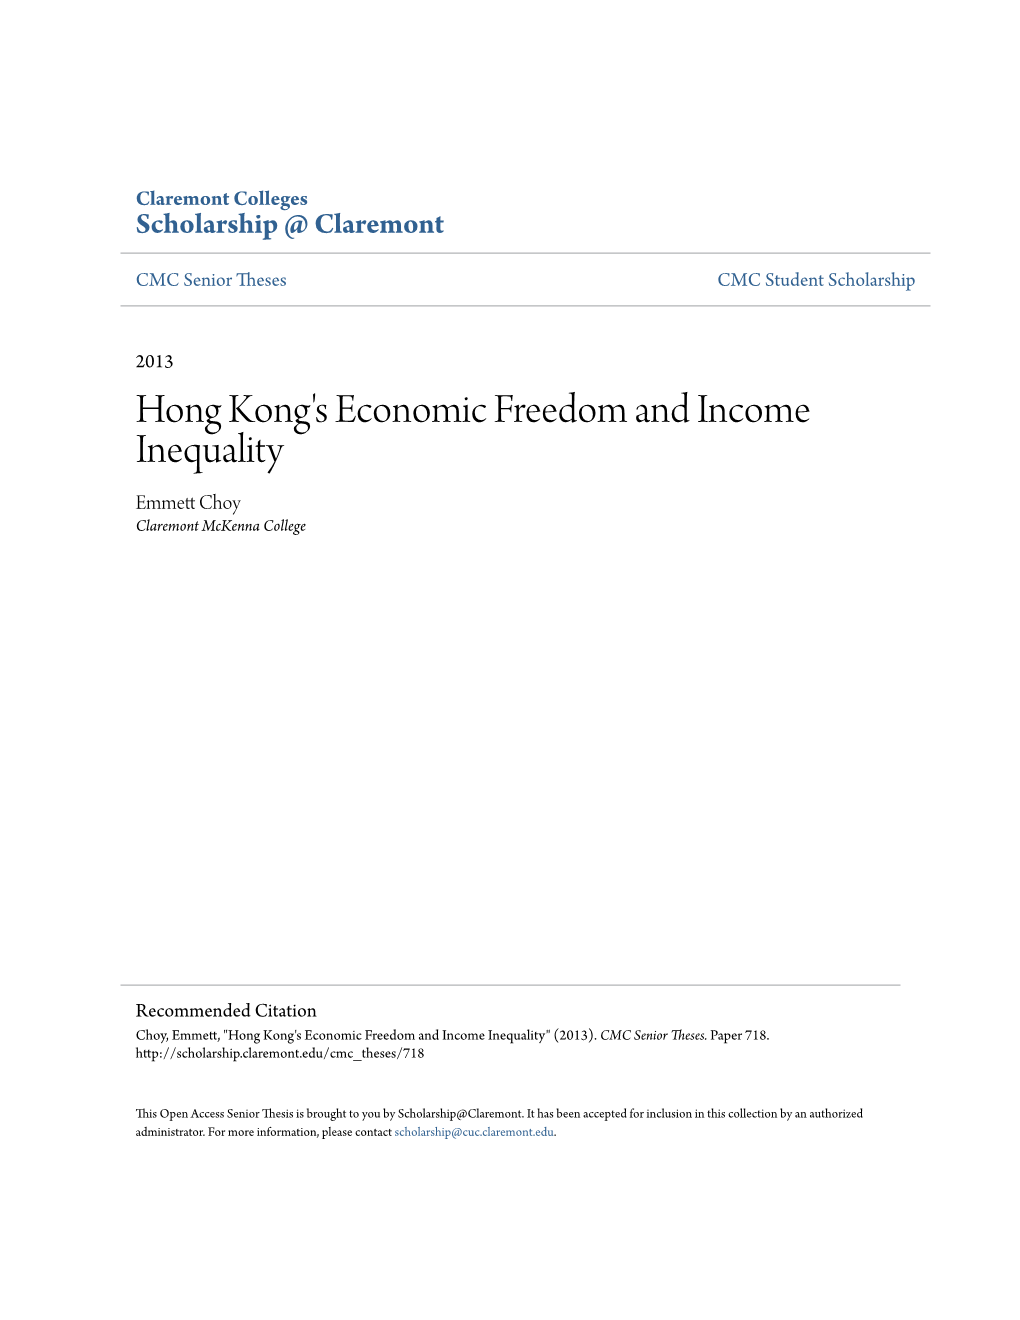 Hong Kong's Economic Freedom and Income Inequality Emmett Hoc Y Claremont Mckenna College